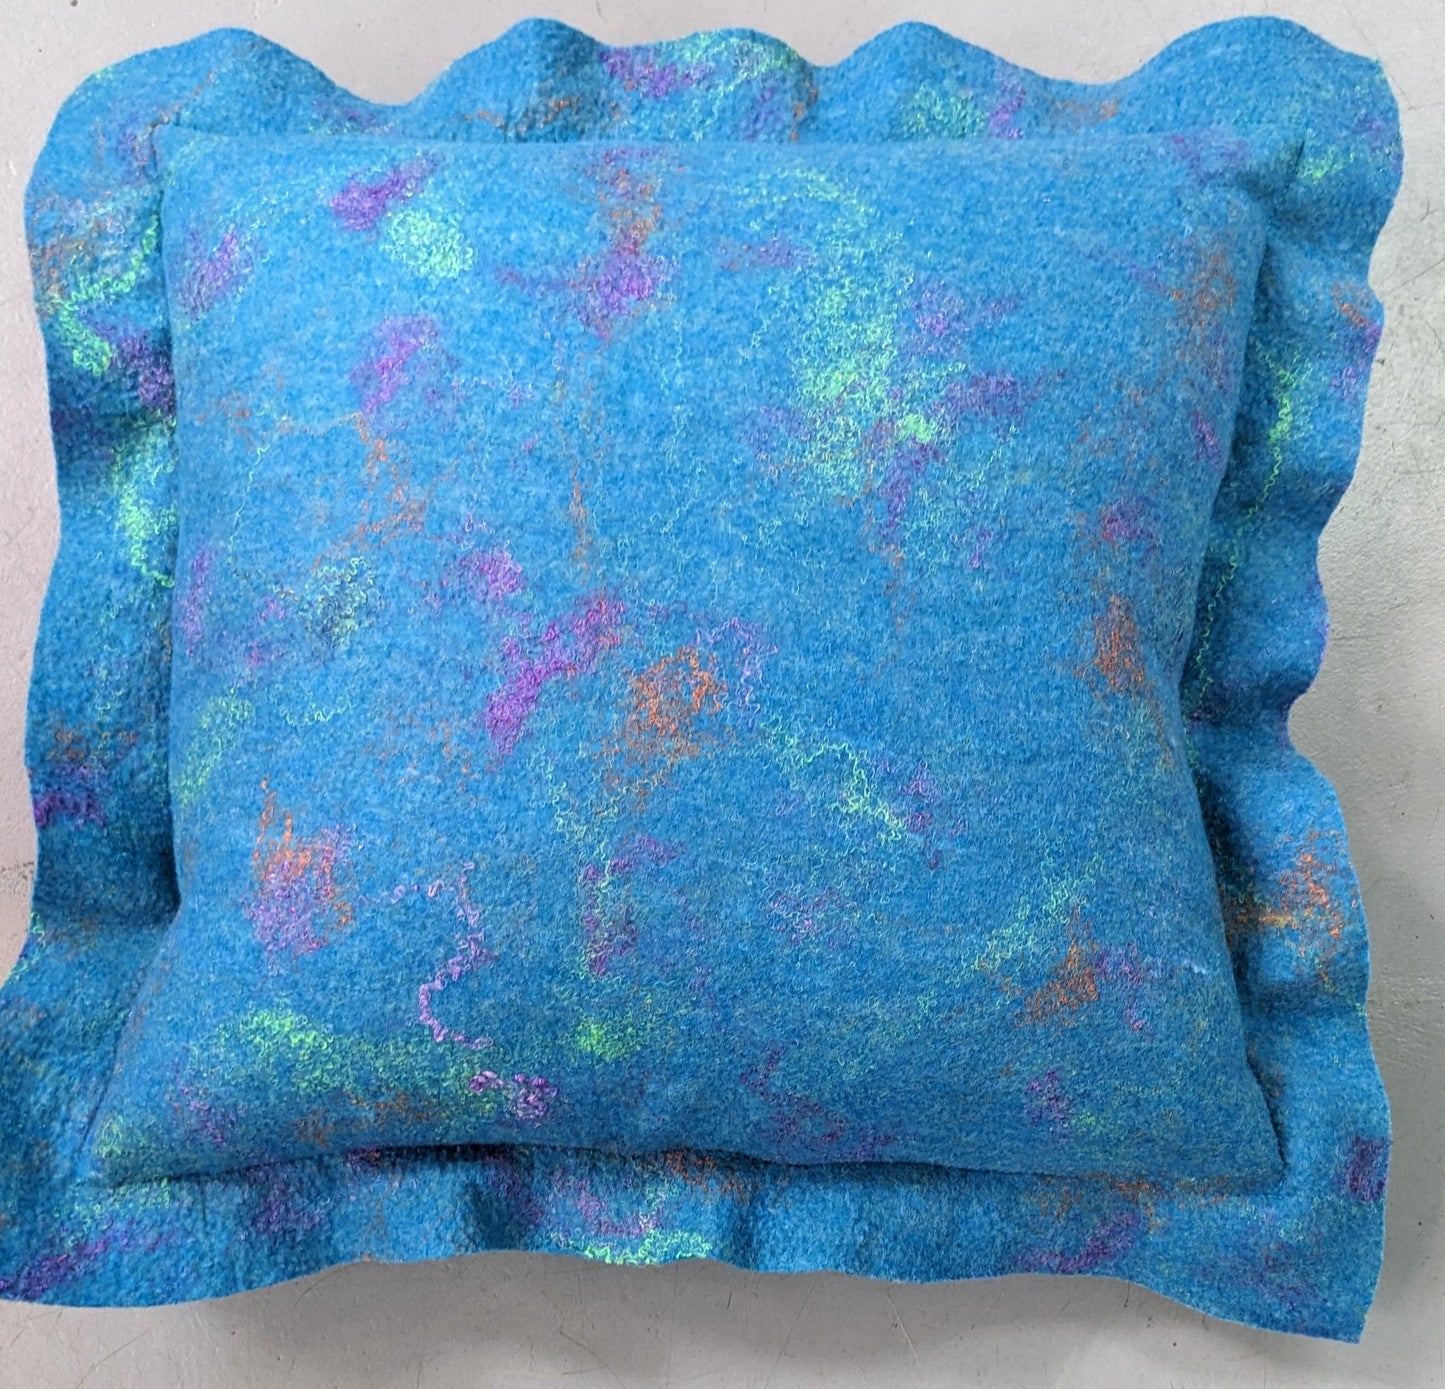 Pillow inspired by Picasso